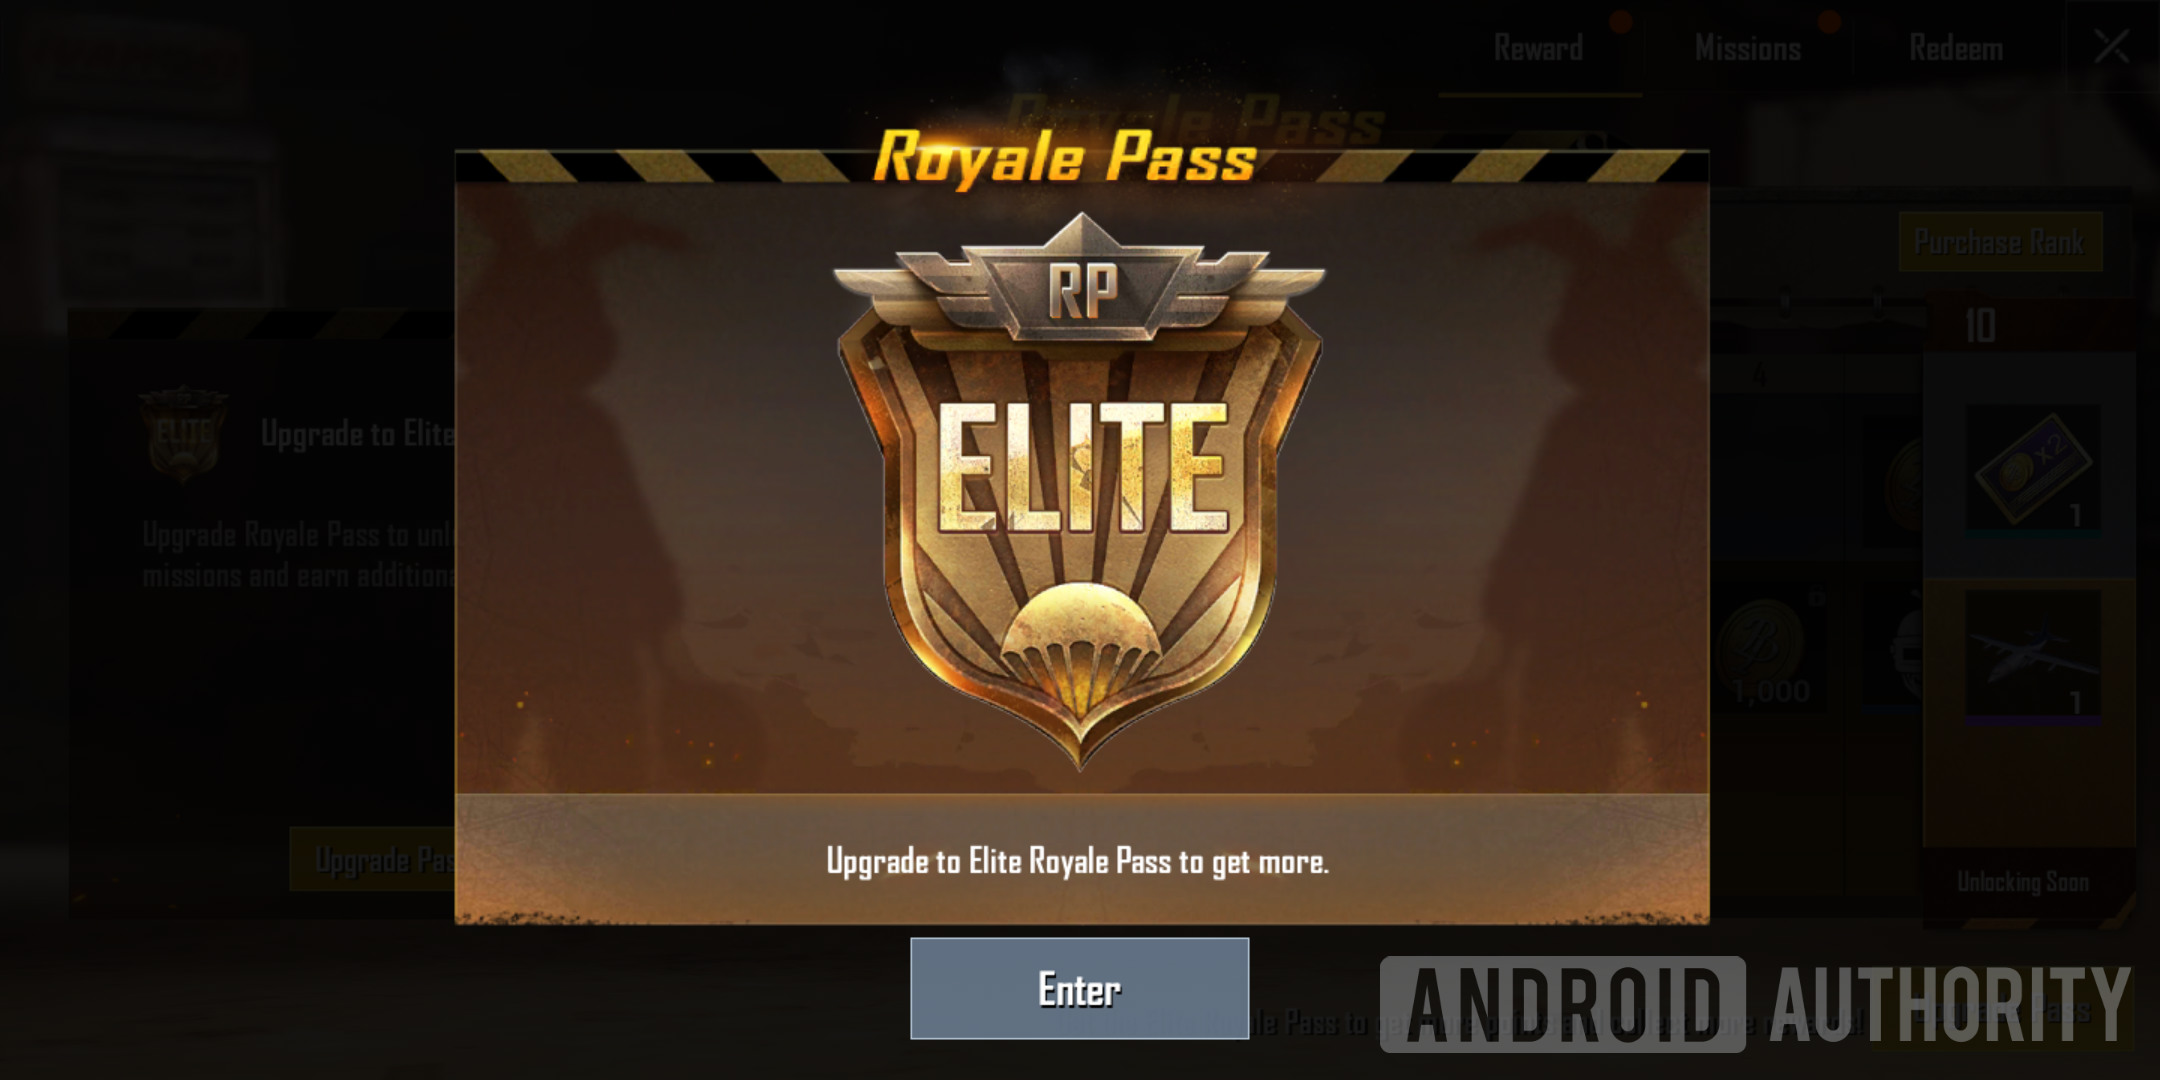 PUBG Mobile inches closer to Fortnite with Royale Pass in ... - 2160 x 1080 jpeg 247kB